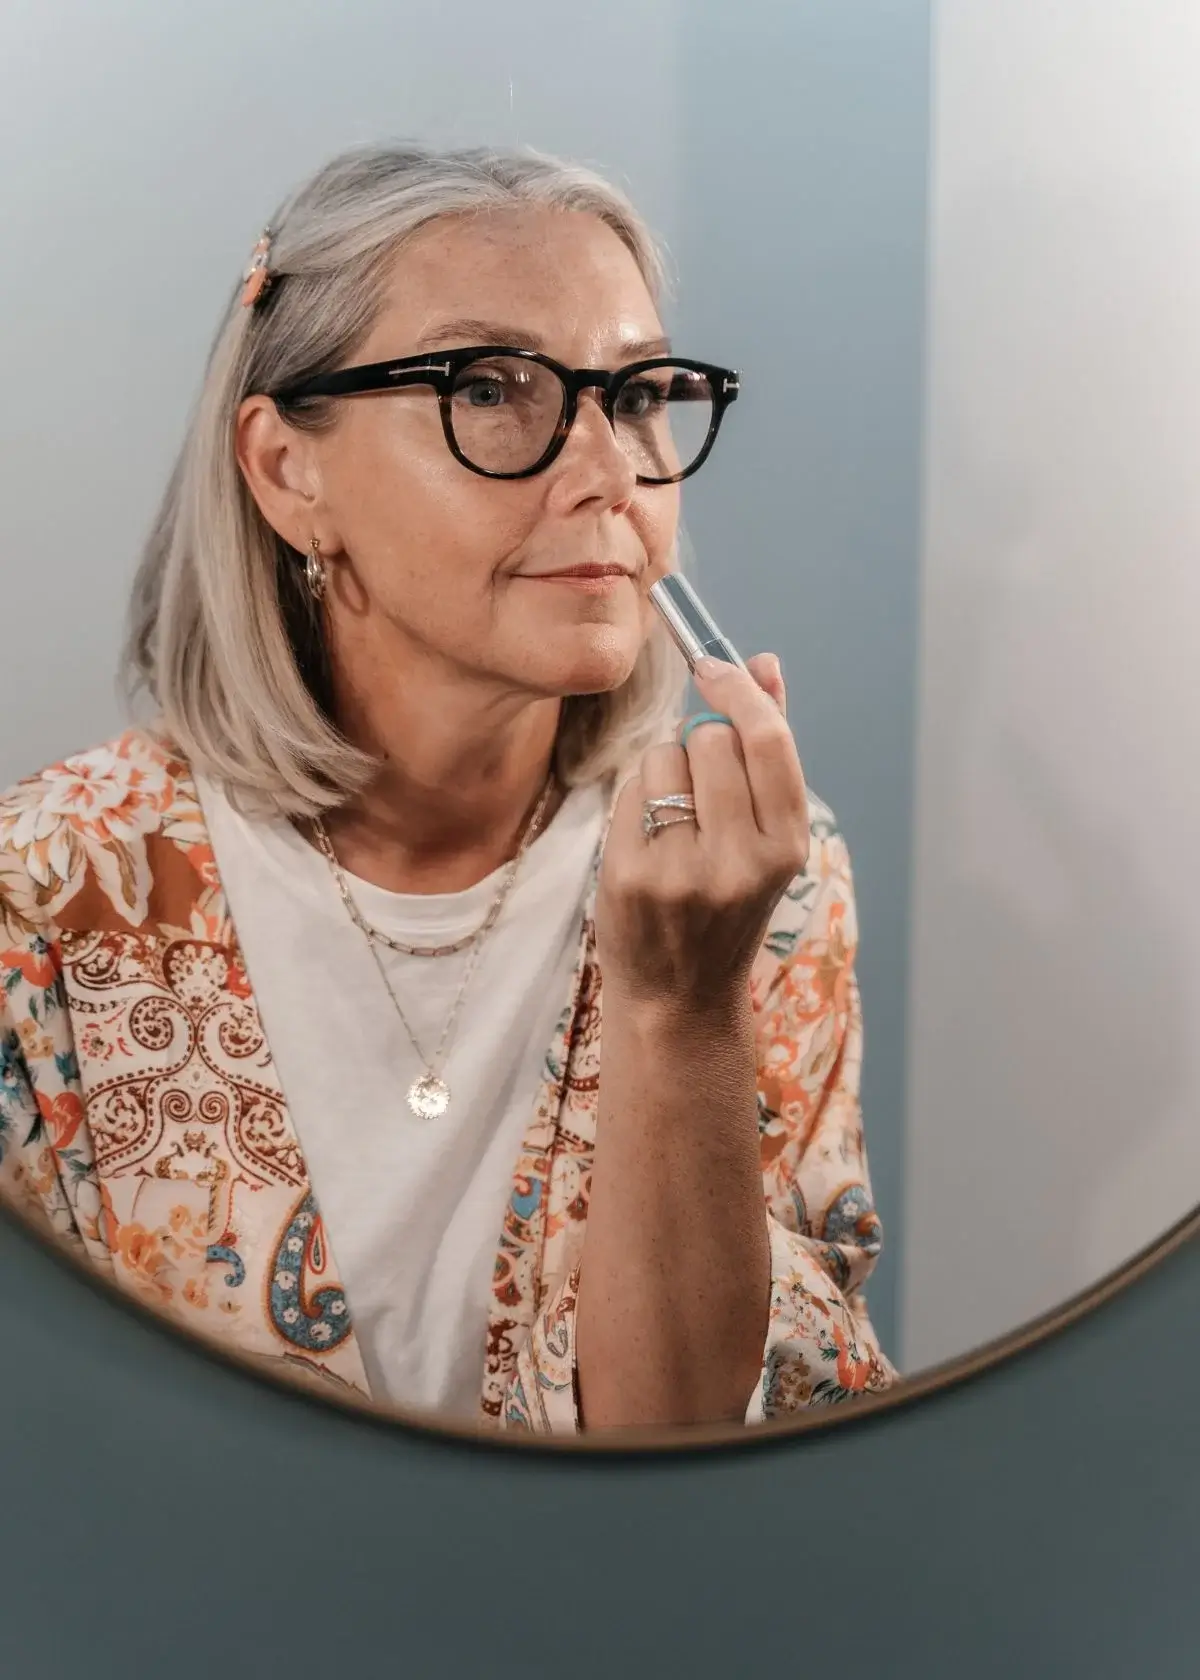 How to Choose the Right Lipstick for Older Women?